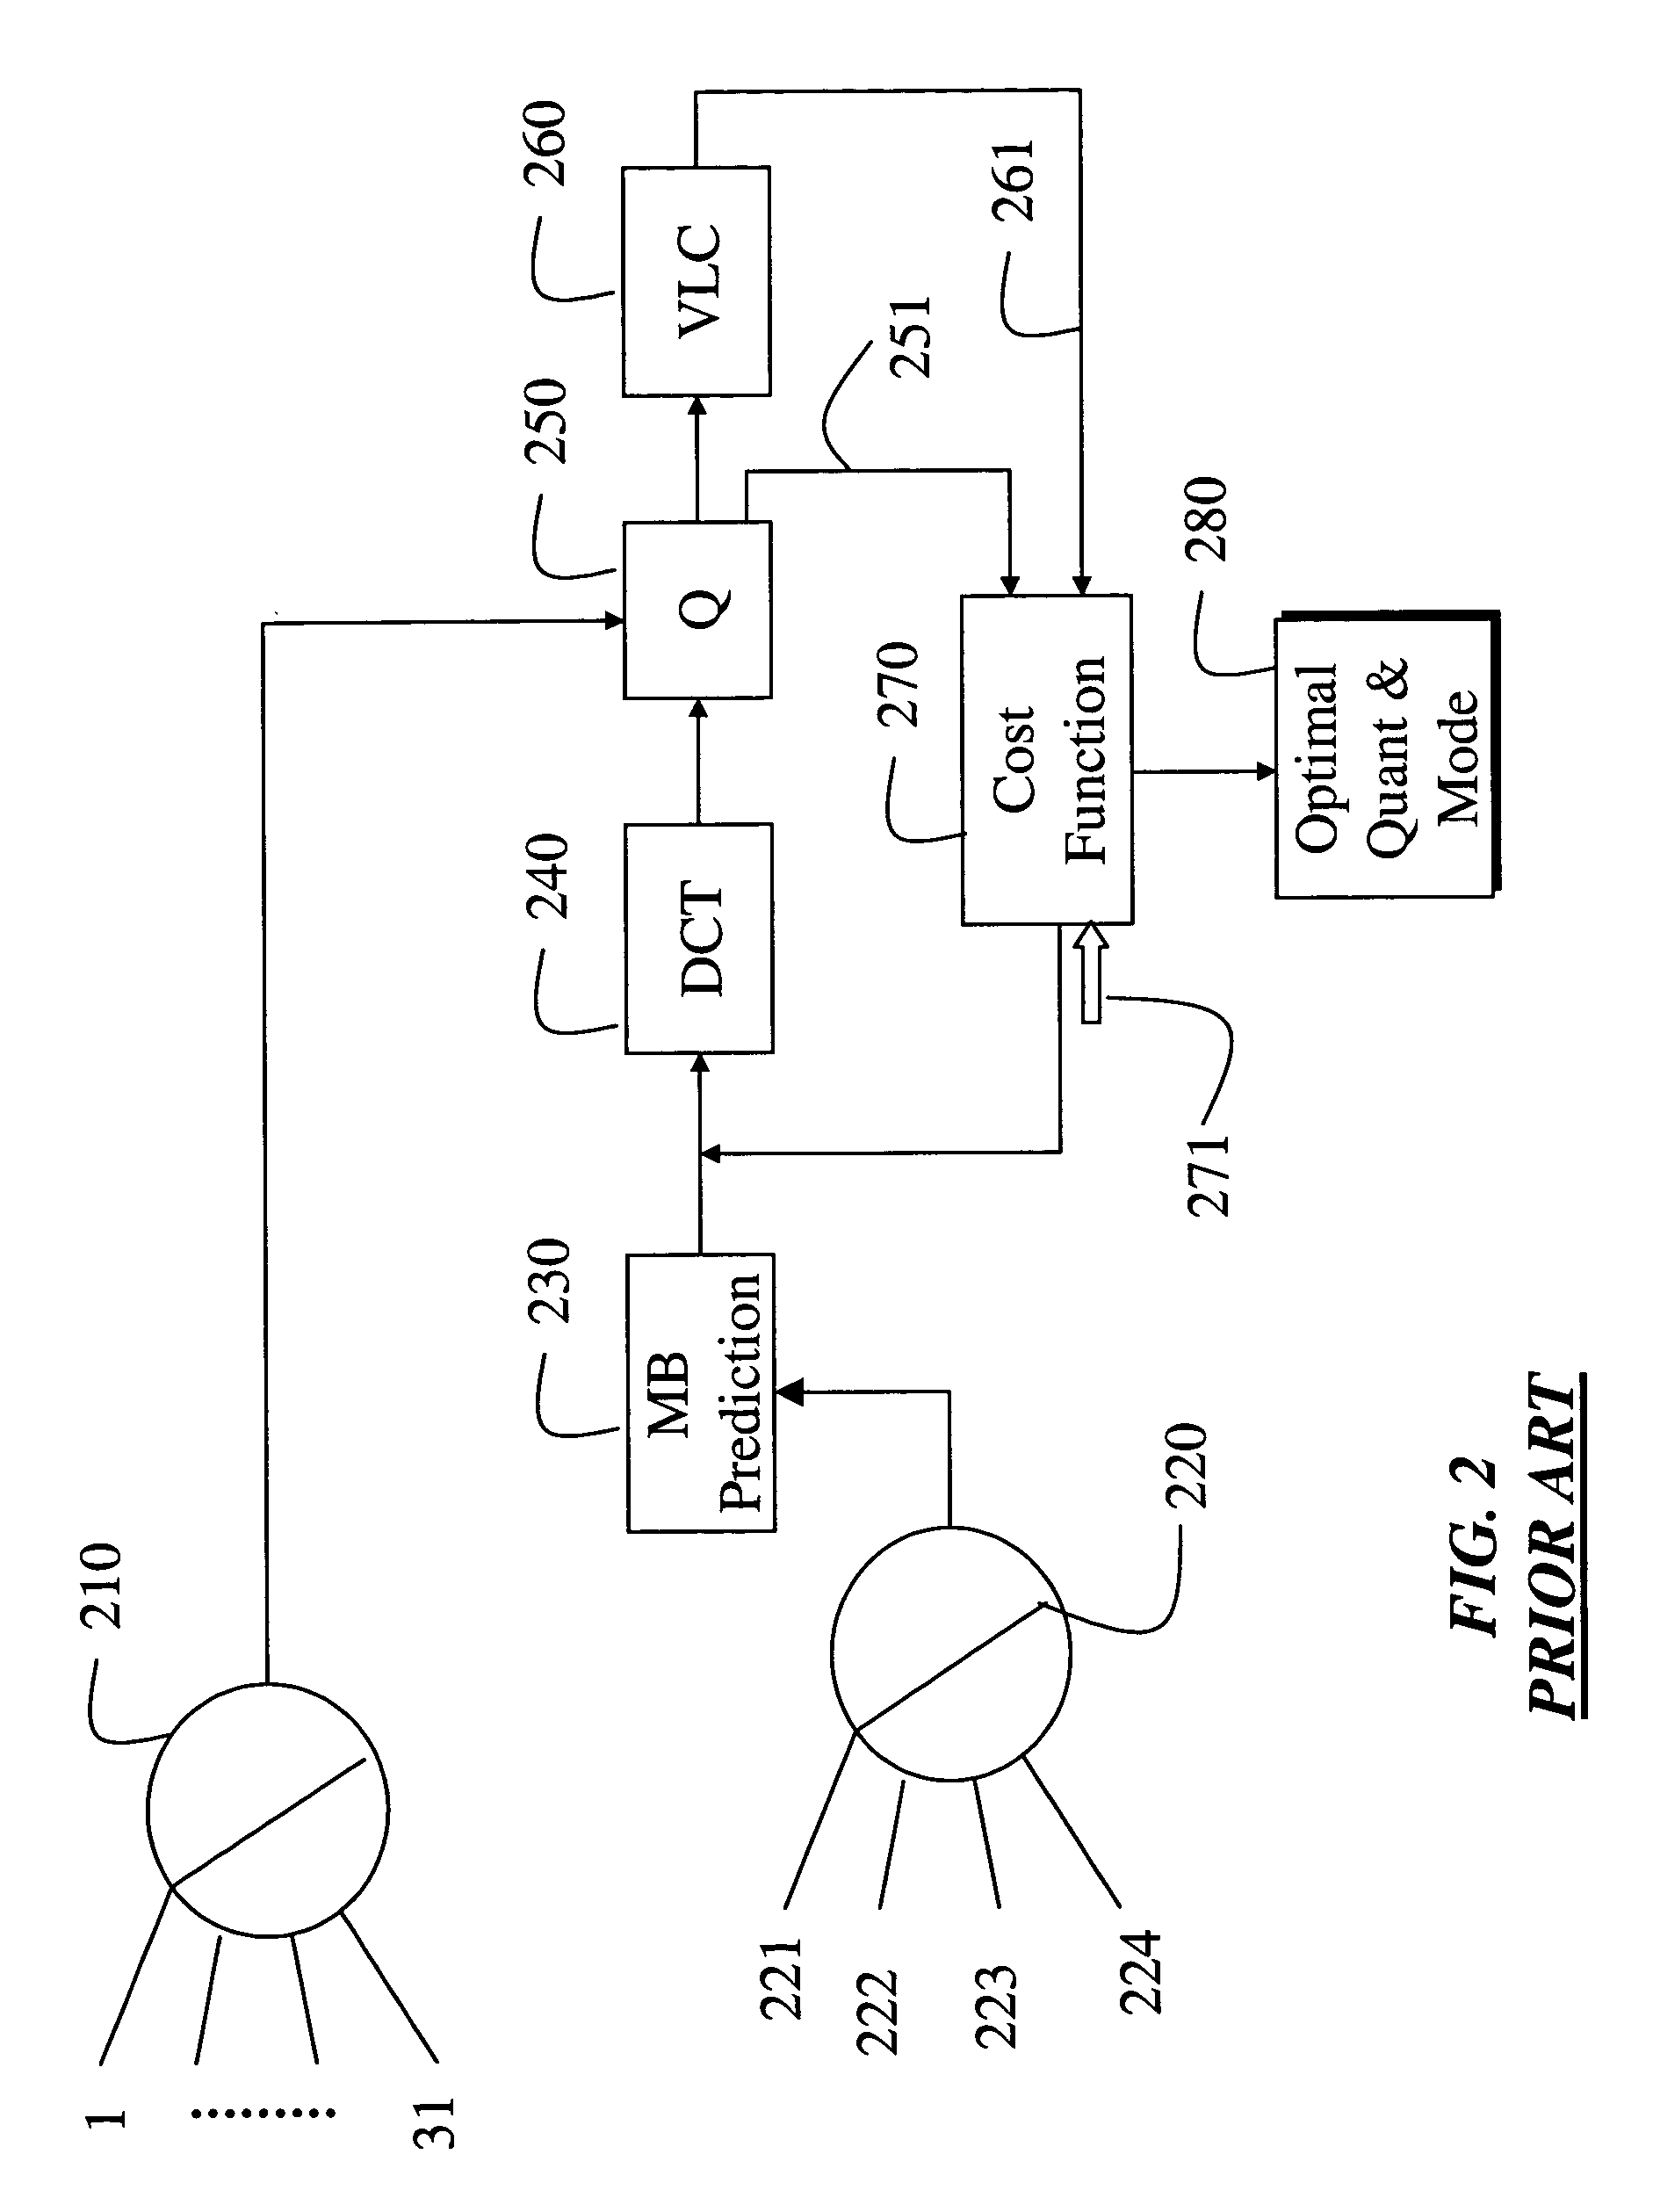 System and method for determining coding modes, DCT types and quantizers for video coding